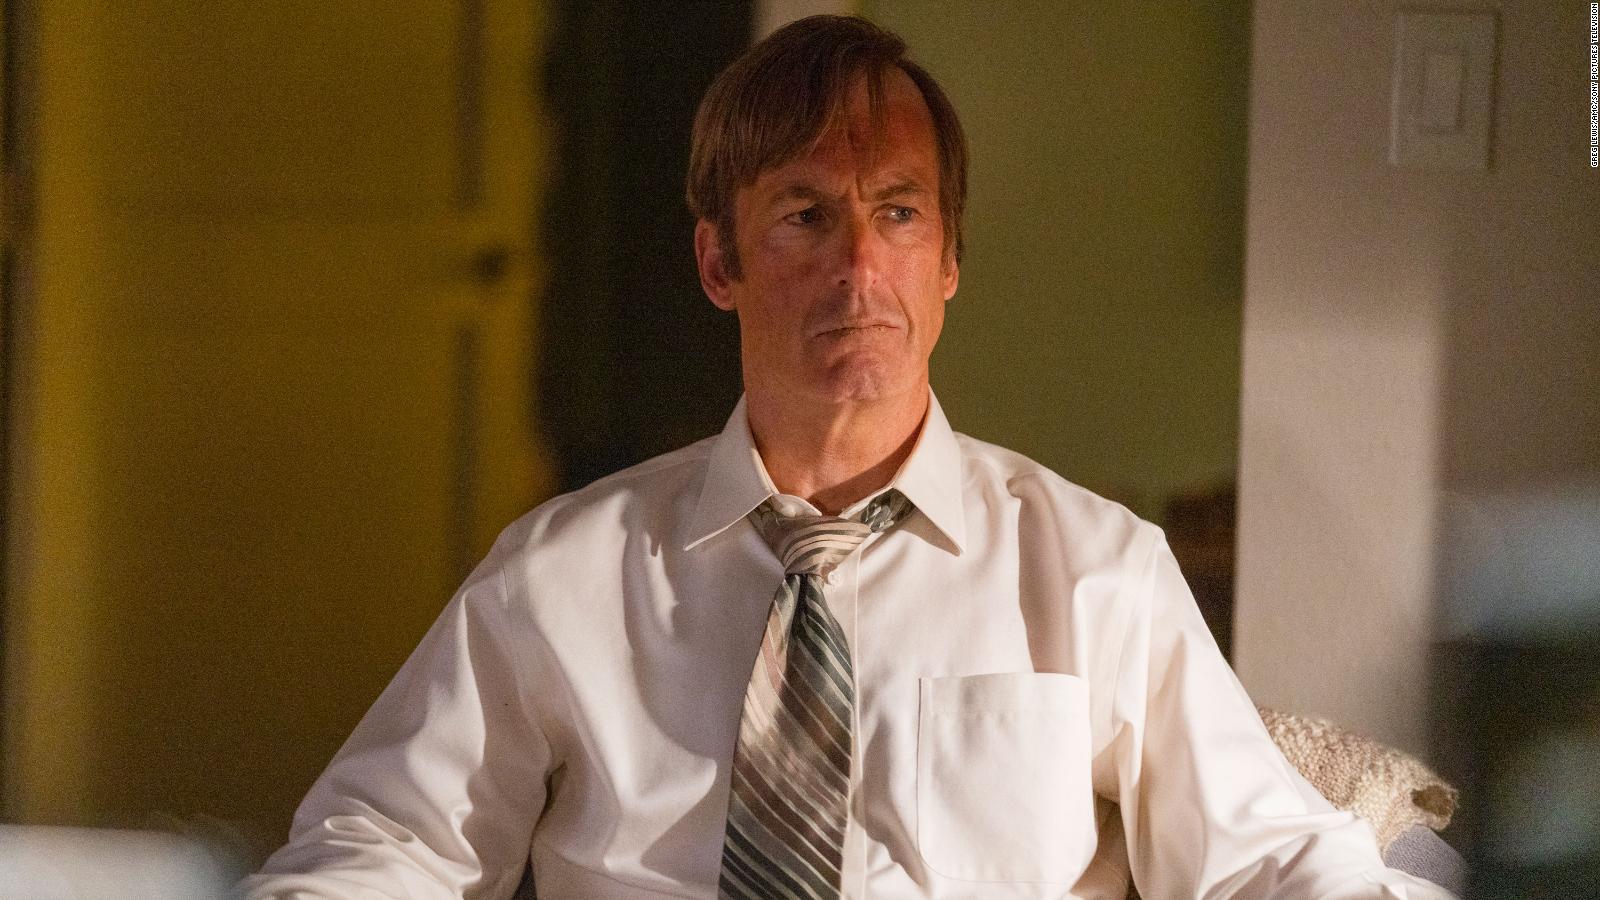 Bob Odenkirk Stable Condition After Collapsing On Better Call Saul